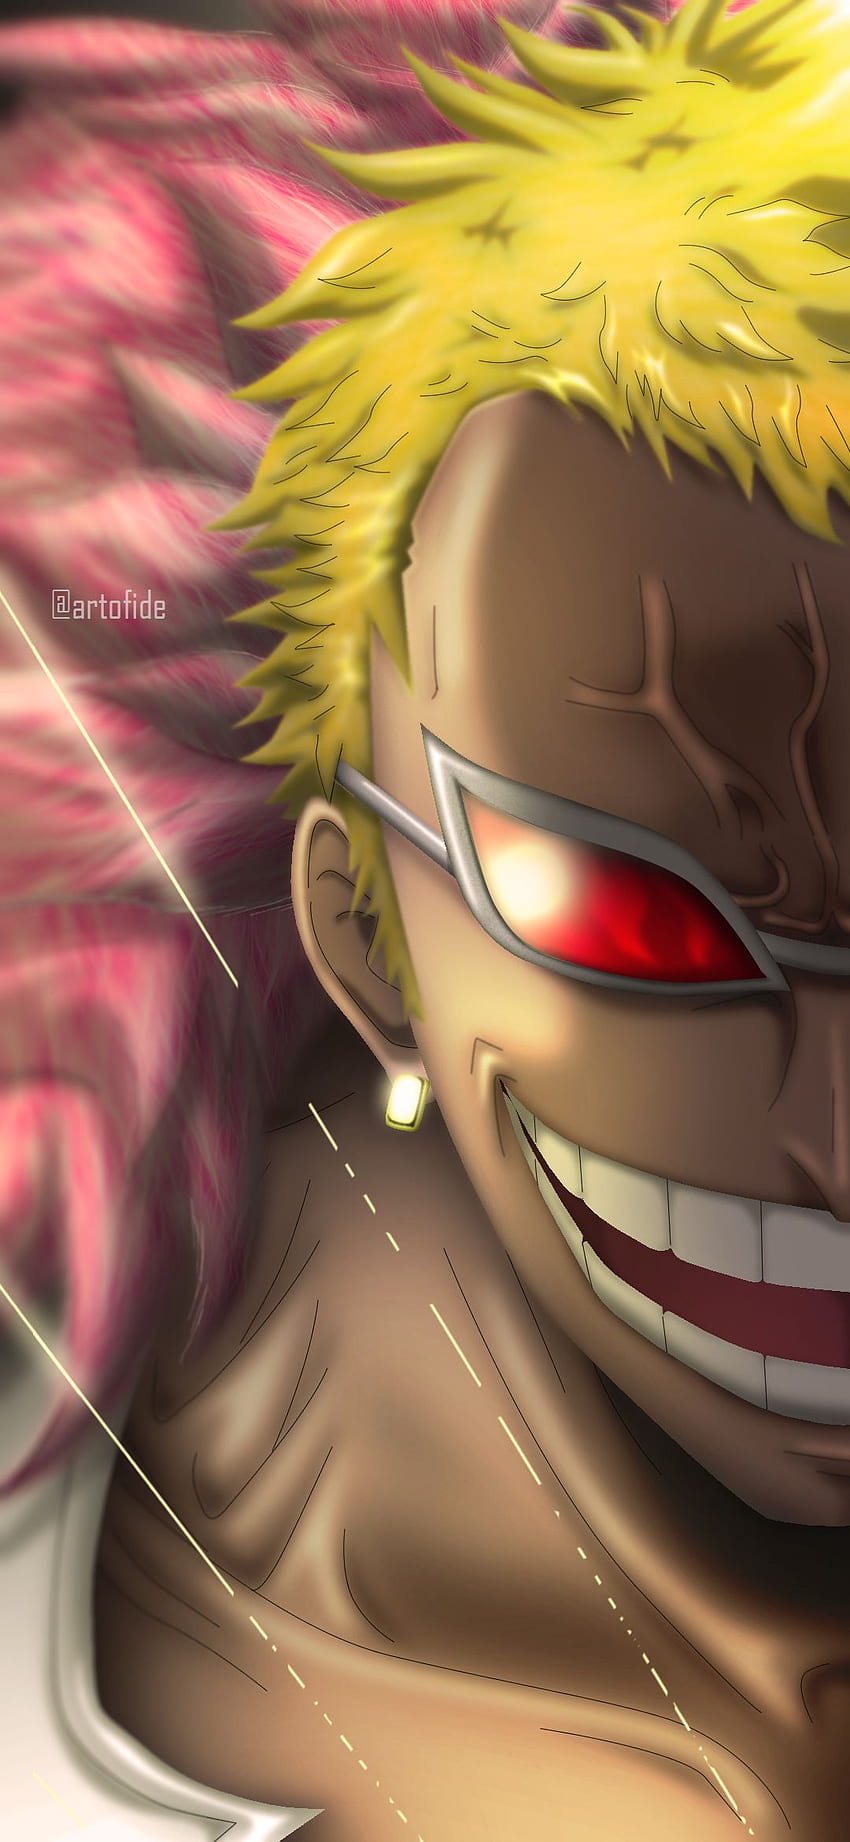 Heavenly Demon - Donquixote Doflamingo in 2021. One piece drawing, One piece tumblr, One piece iphone HD phone wallpaper